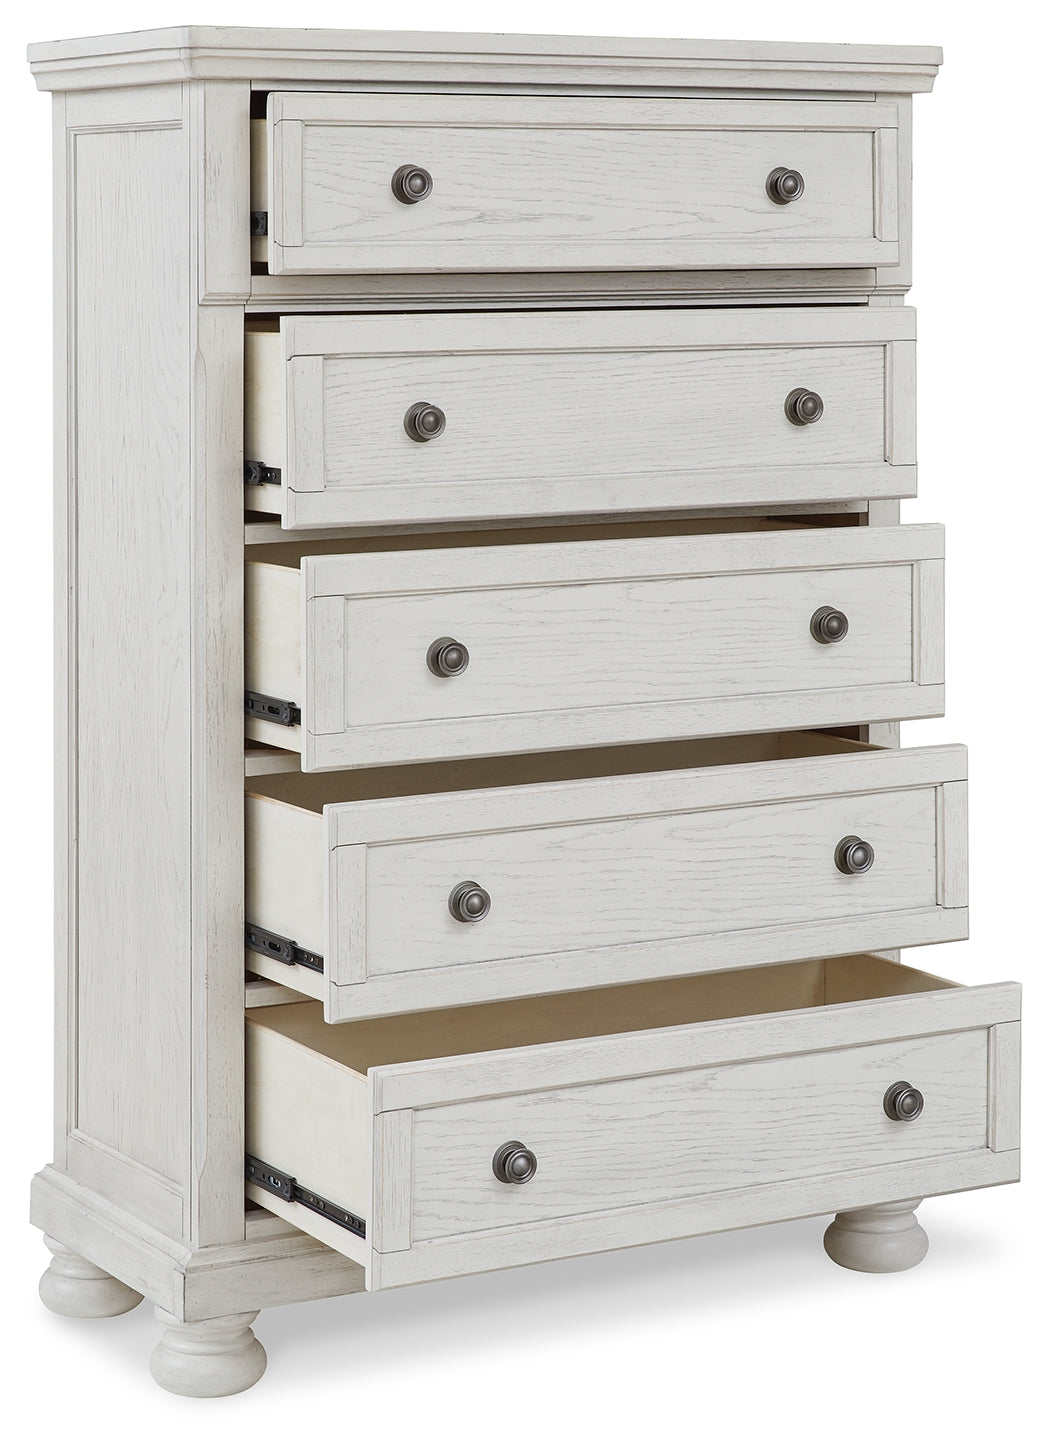 Robbinsdale White Queen Panel Storage Bedroom Set with Dresser, Mirror and Chest